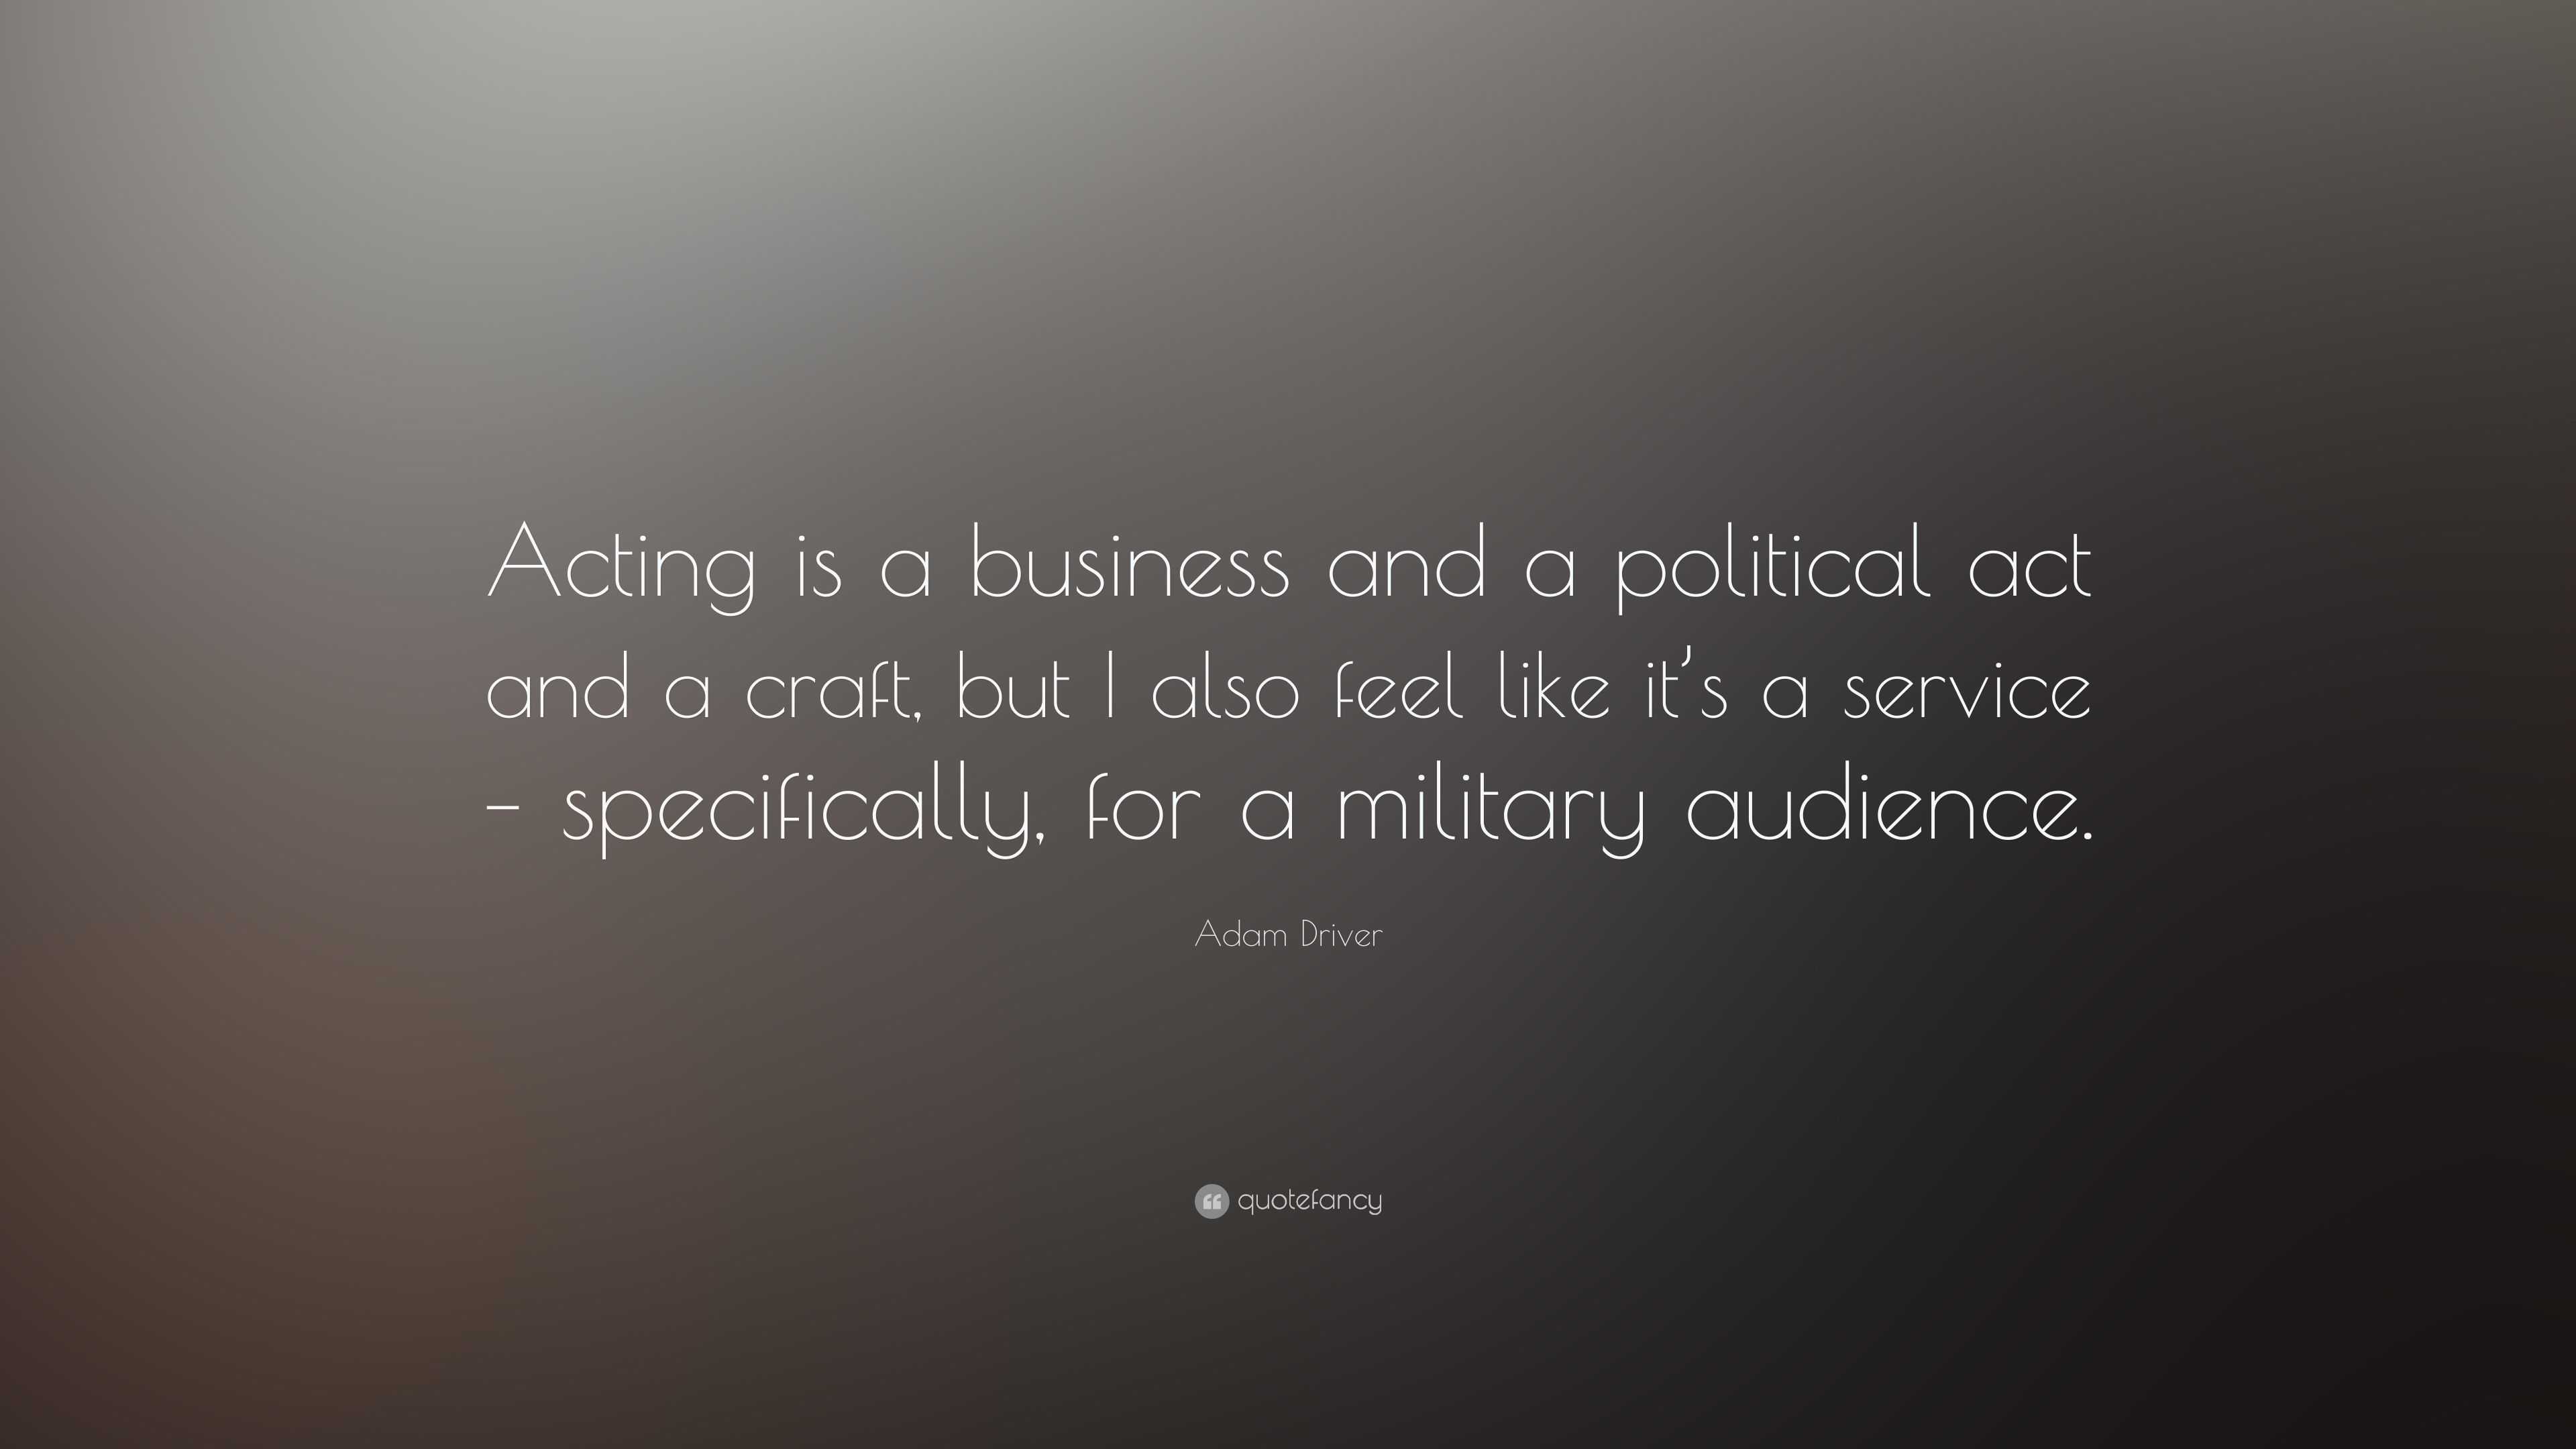 Adam Driver Quote: “Acting is a business and a political act and a craft,  but I also feel like it's a service – specifically, for a military”